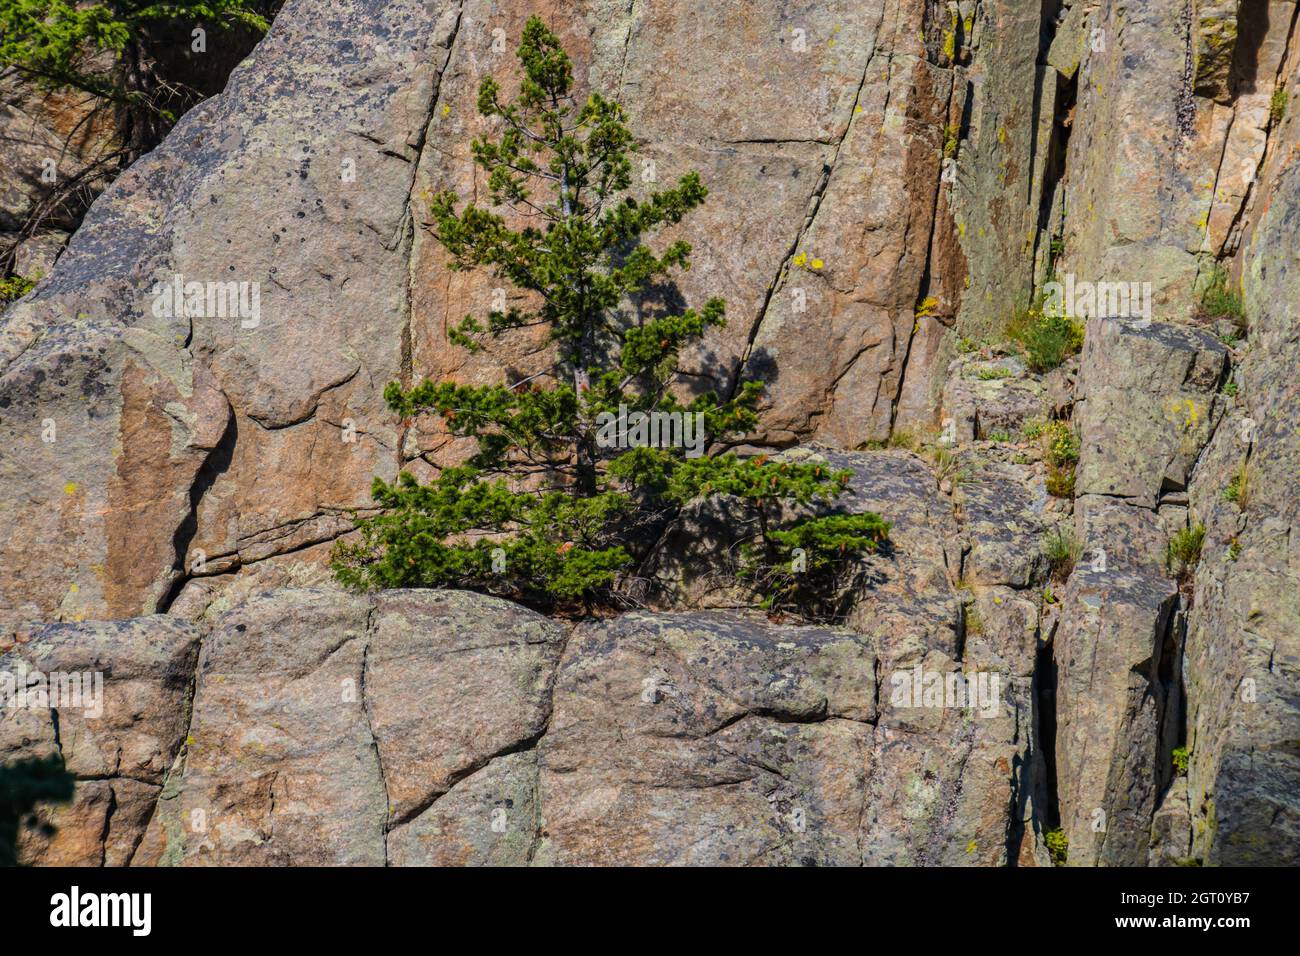 thrive where you are planted: a tree hangs on and grows on a rocky cliff Stock Photo